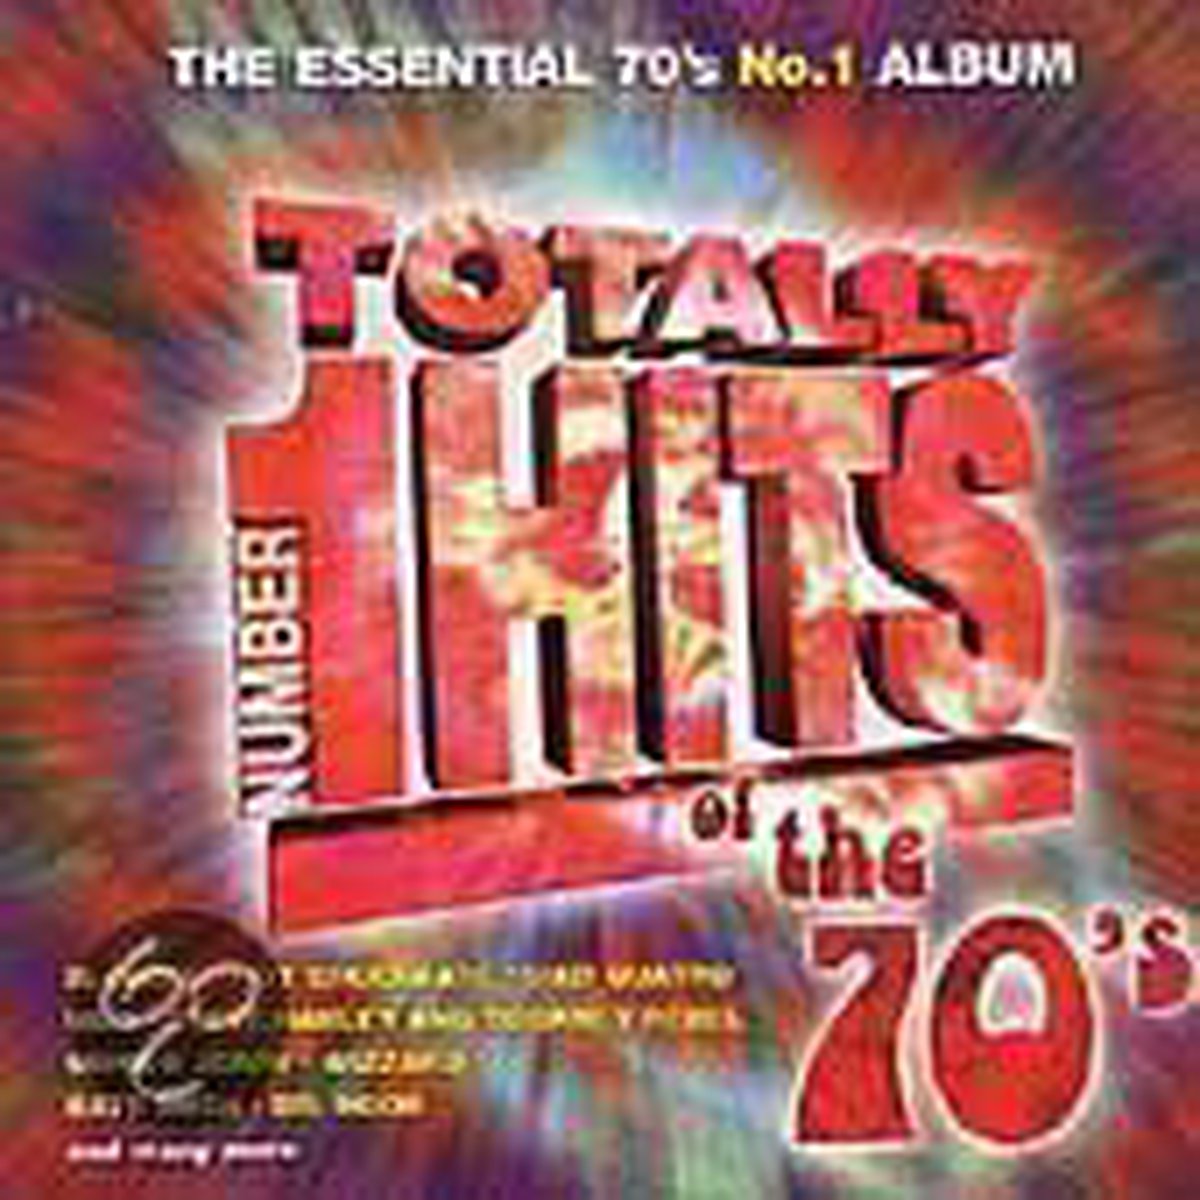 Totally Number 1 Hits of the 70's - various artists